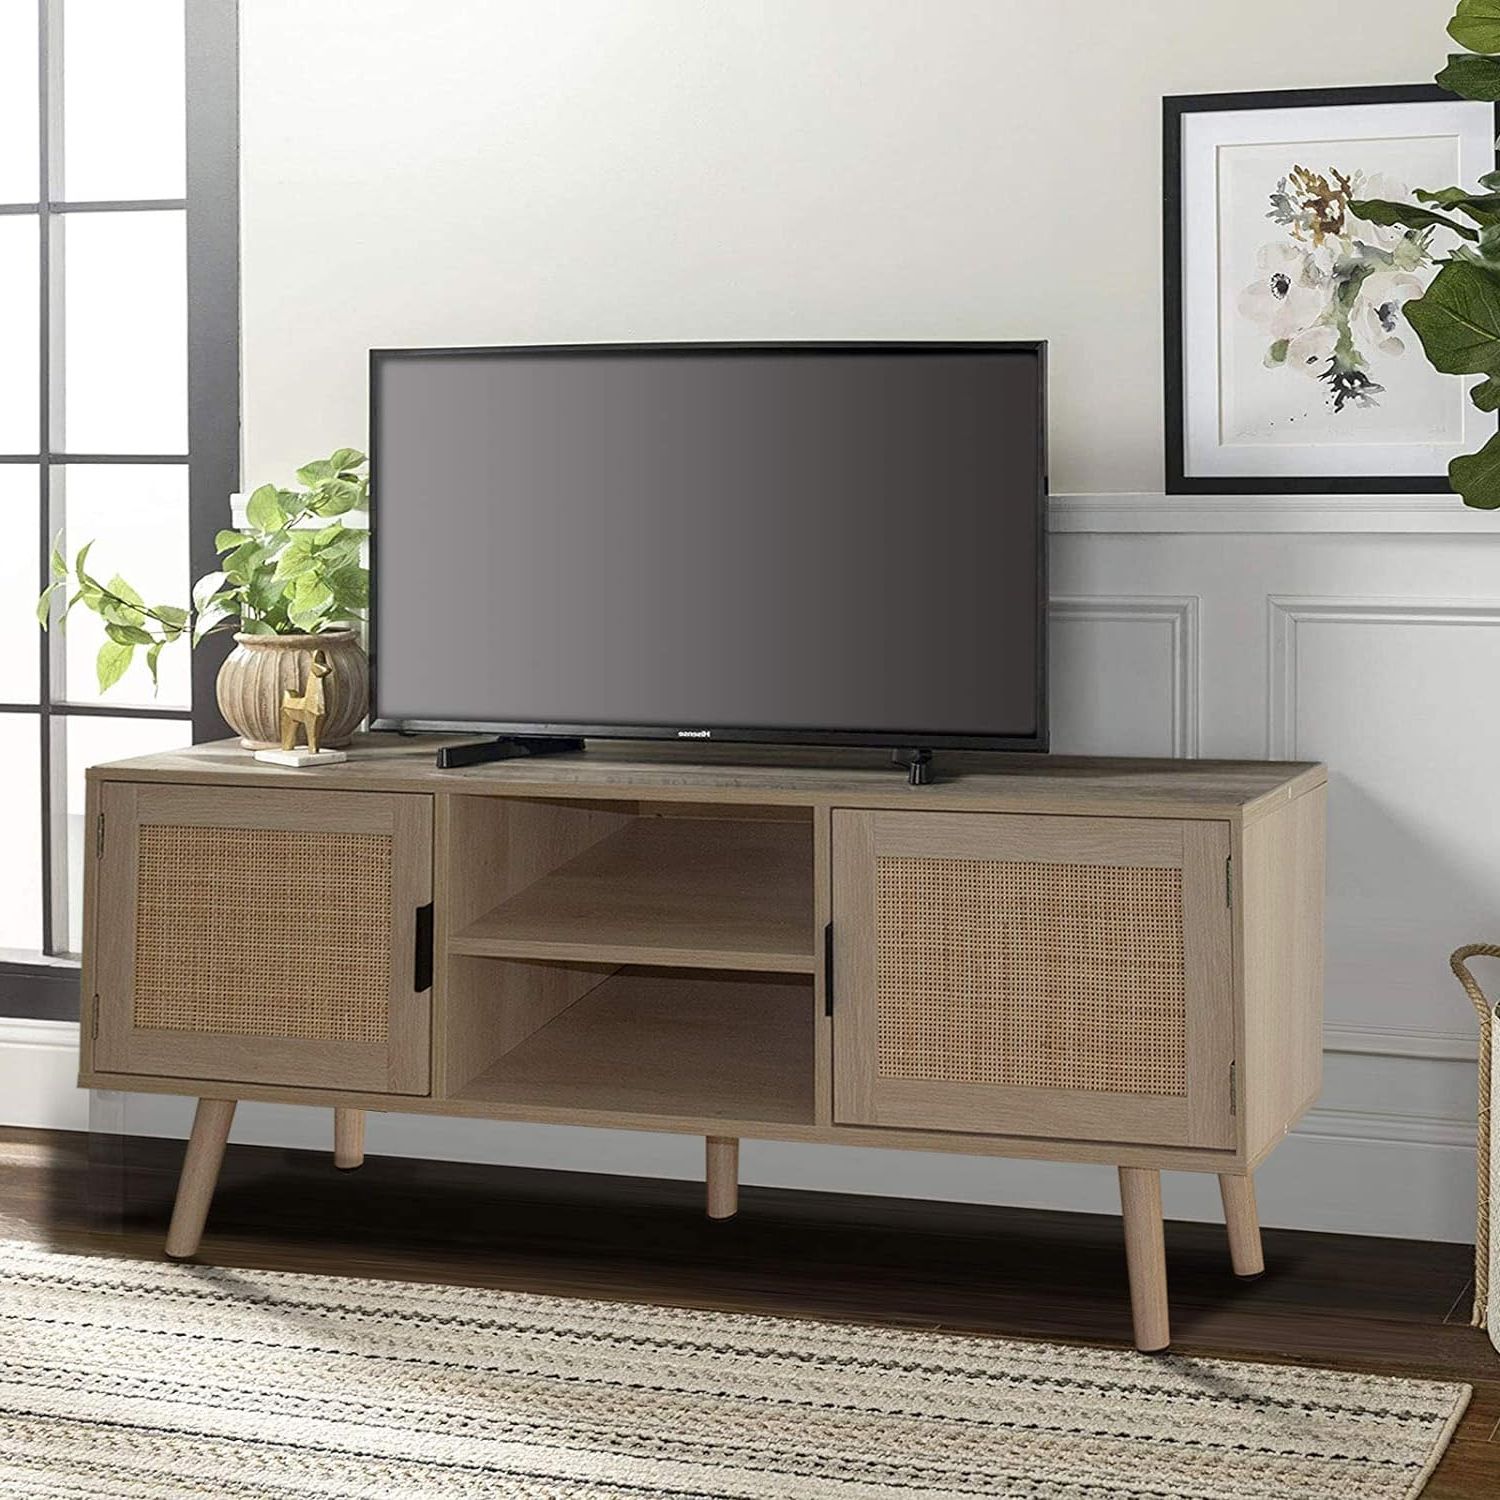 Most Recent Farmhouse Rattan Tv Stands With Regard To Buy Anmytek Farmhouse Rattan Tv Stand Modern Wood Media Entertainment (Photo 1 of 15)